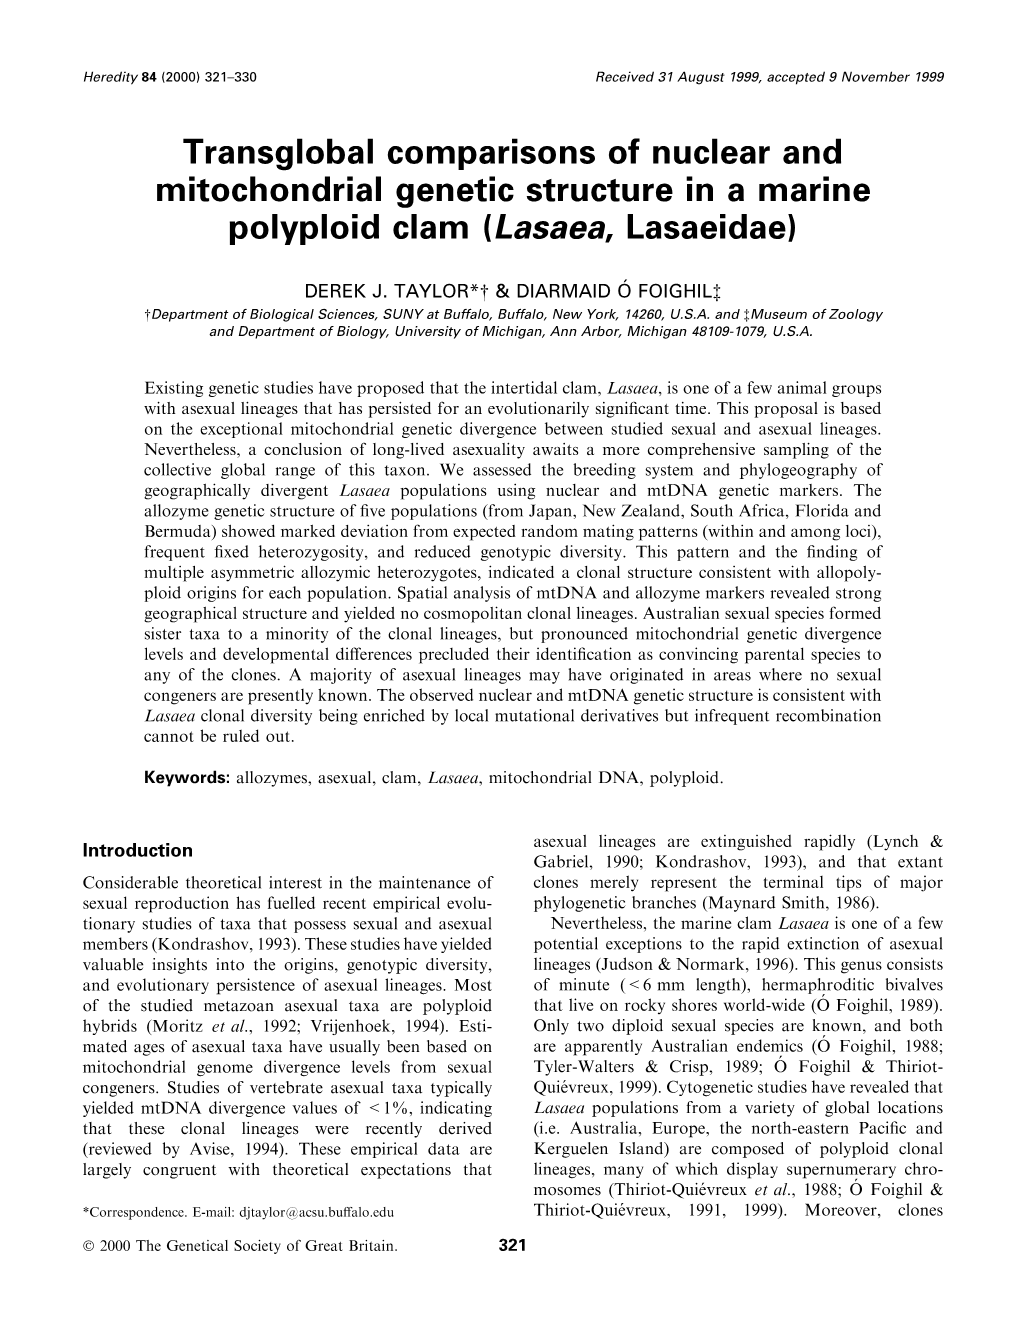 Transglobal Comparisons of Nuclear and Mitochondrial Genetic Structure in a Marine Polyploid Clam (Lasaea, Lasaeidae)